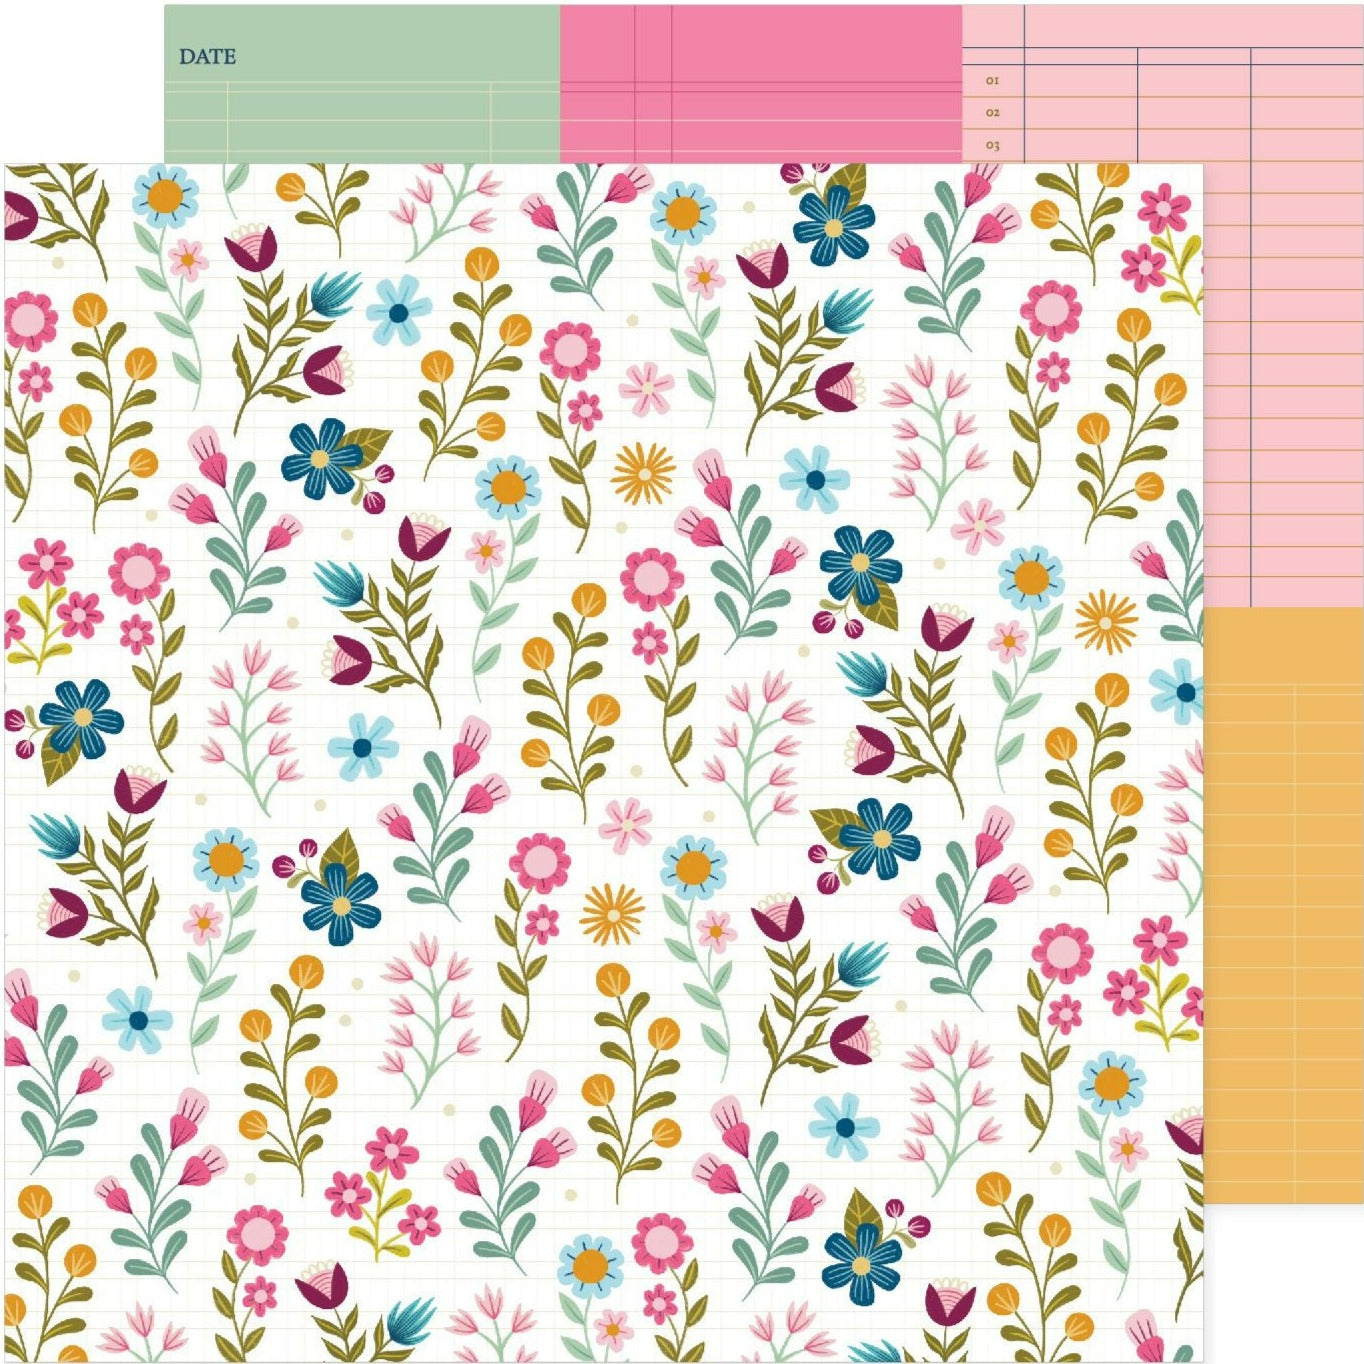 Pink Paislee's double-sided 12x12 paper features a white background adorned with whimsical pink, blue, and yellow flowers with green leaves on one side and 3x4 notecards in matching colors on the other.